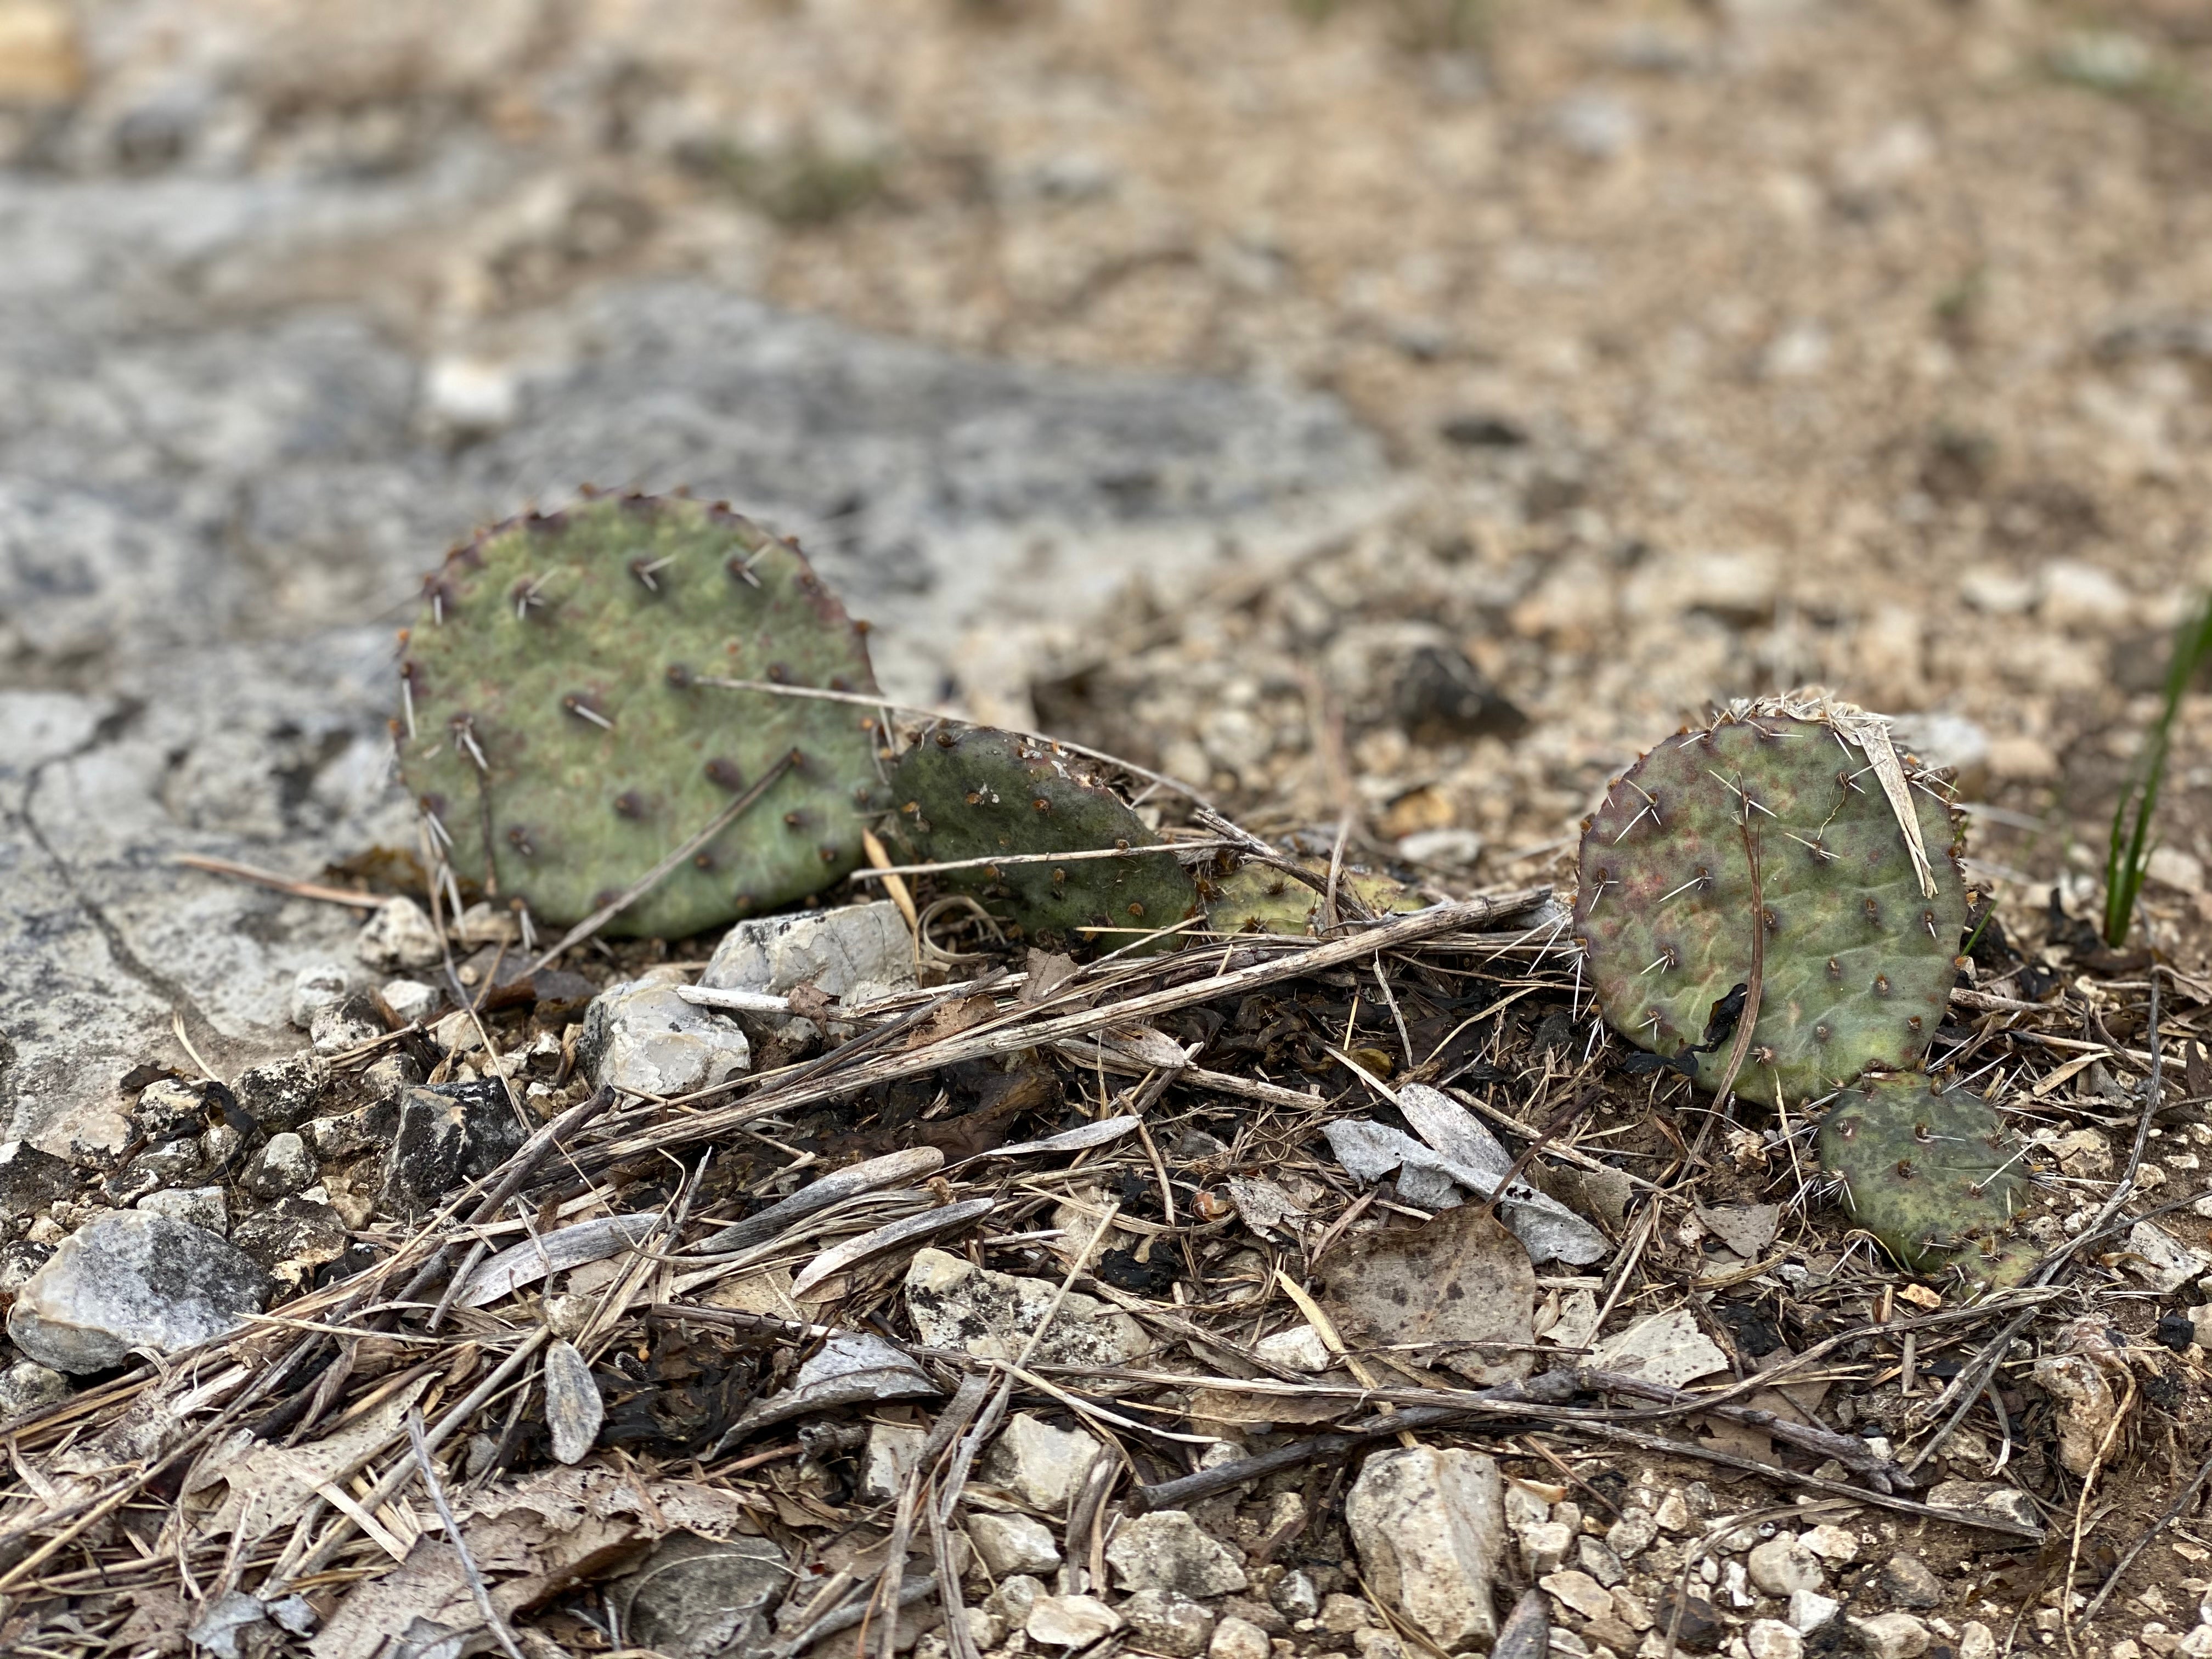 I was surprised to see these cacti growing along the trail